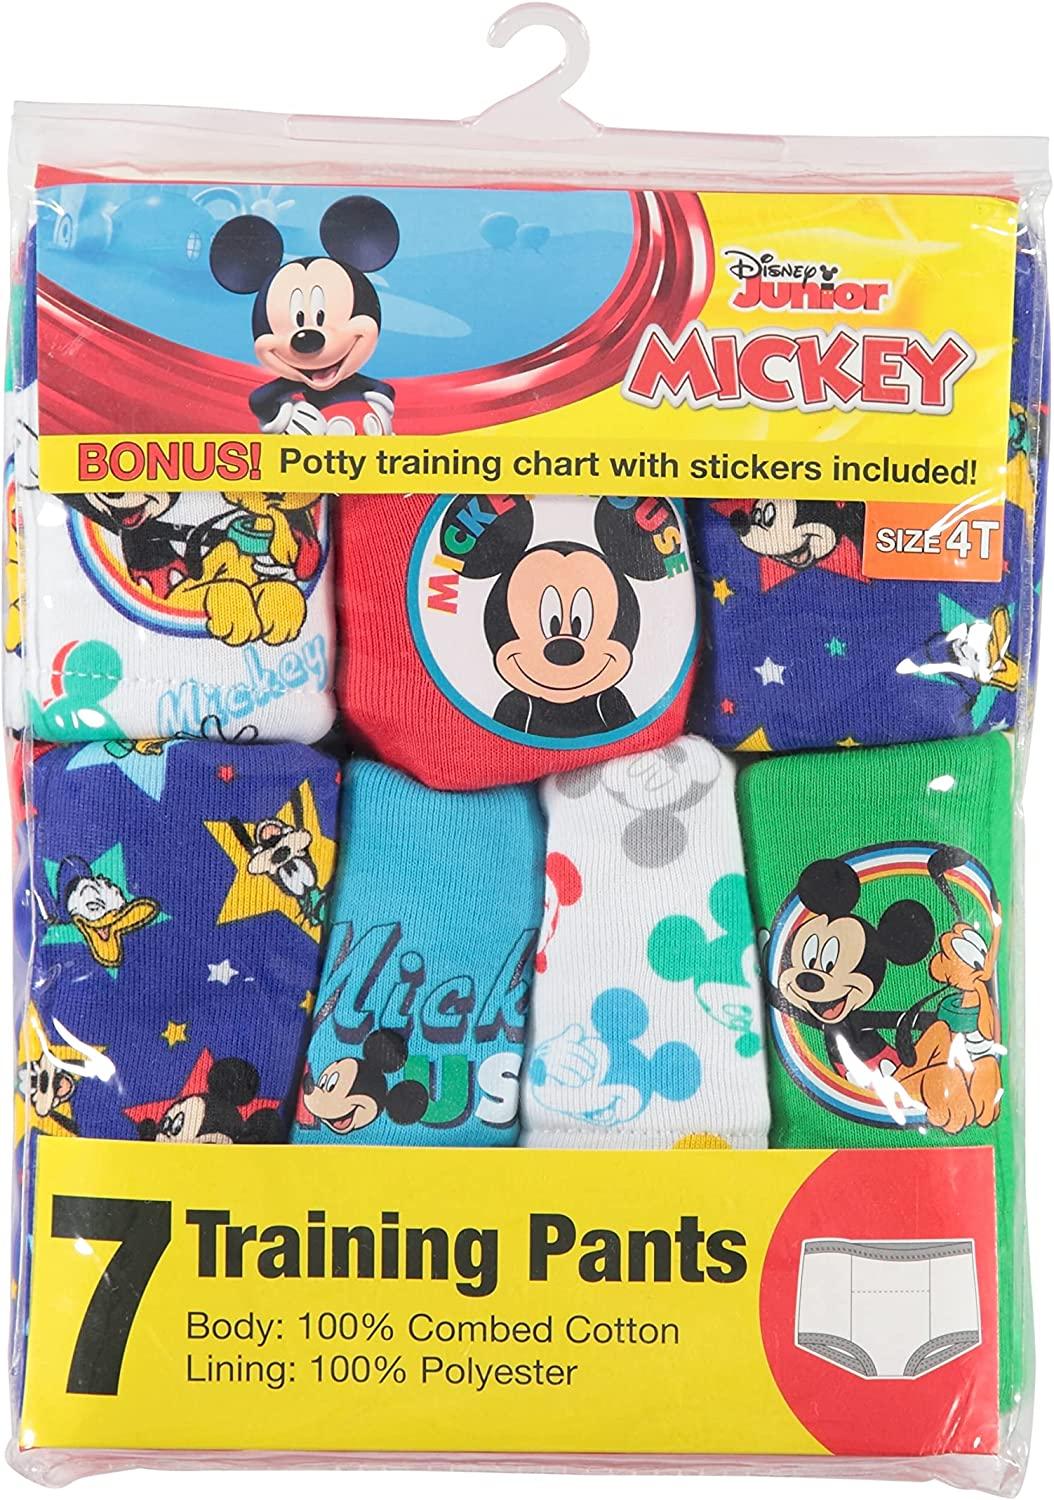 Disney Baby Toddler Boys' Mickey Mouse Potty Training Pants Multipack